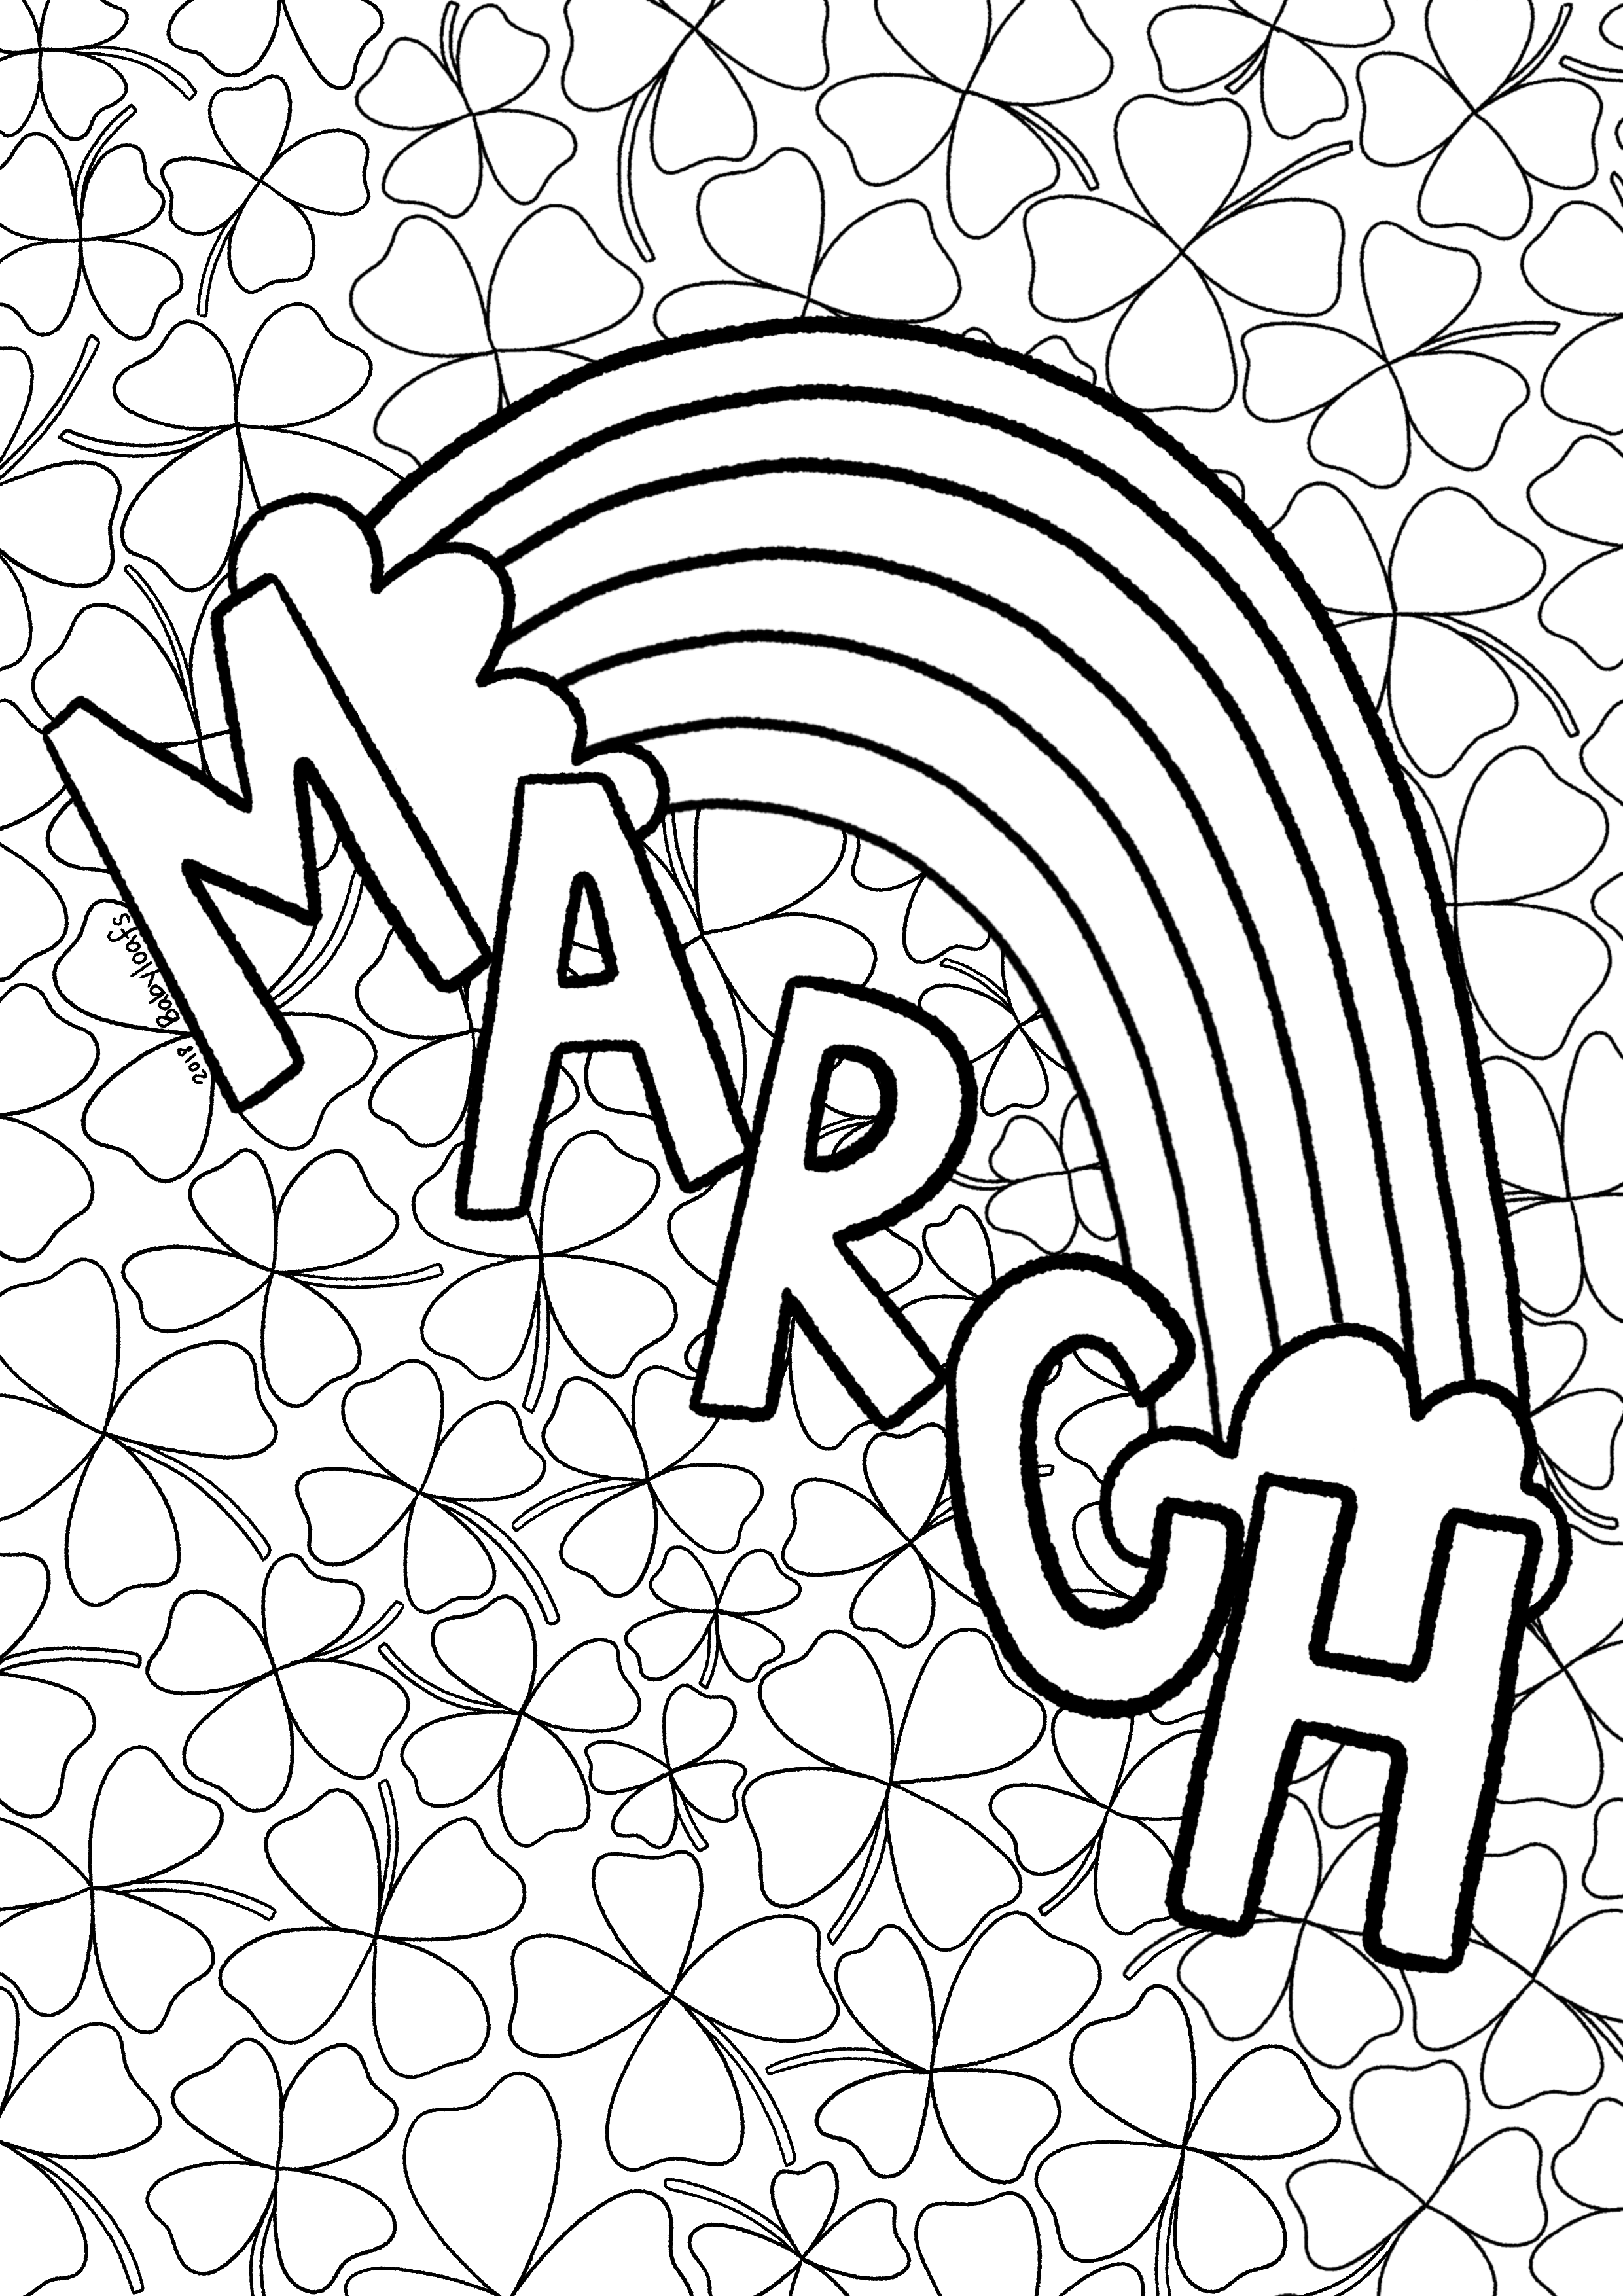 March Rainbow Coloring Sheet   Donuts and Drama